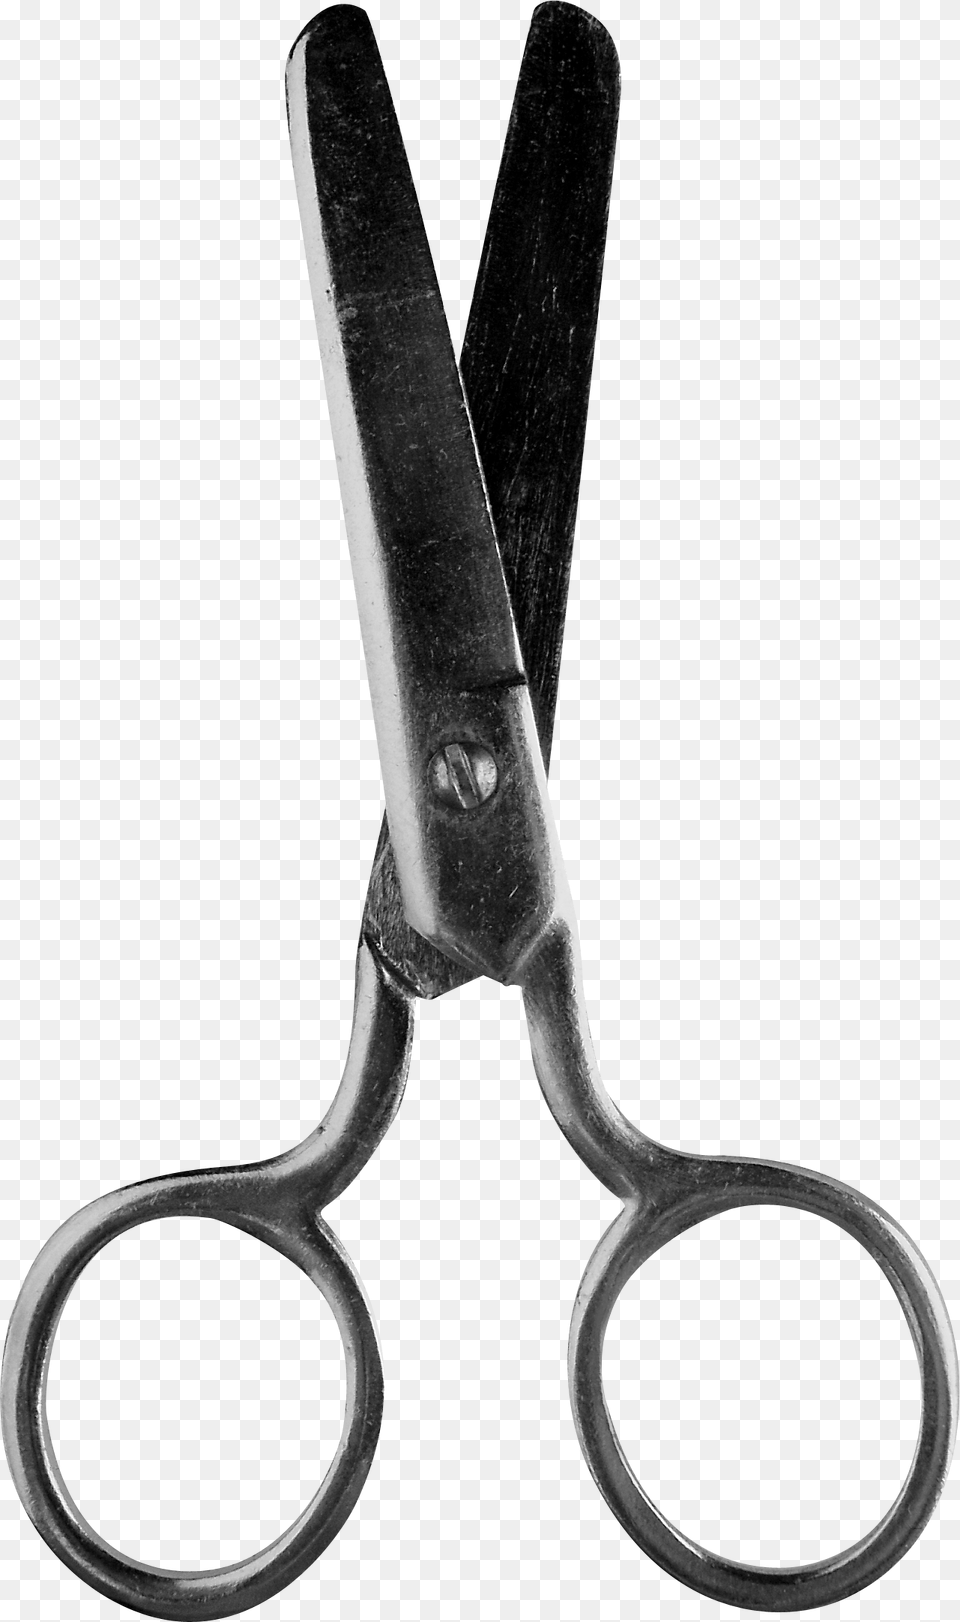 Portable Network Graphics, Scissors, Blade, Shears, Weapon Free Png